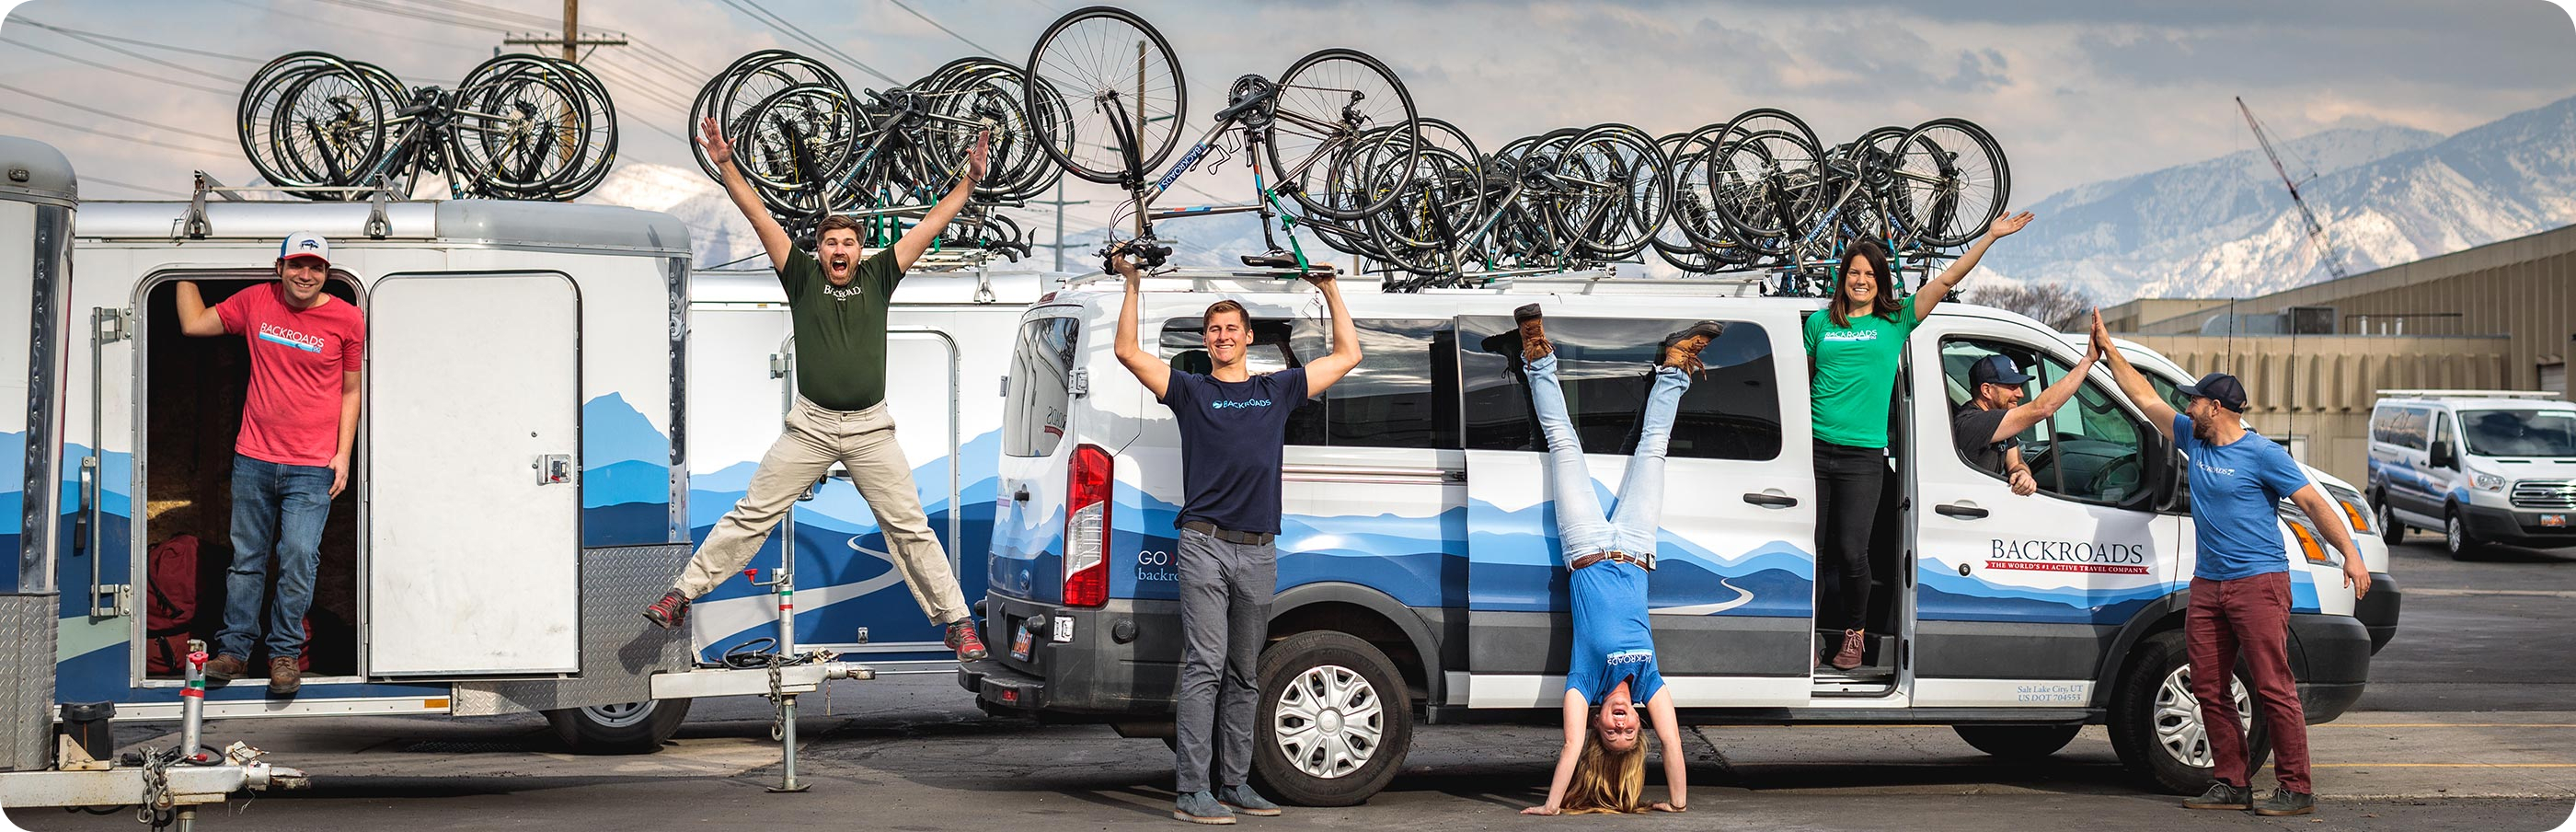 Group of Backroads leaders posing with Bikes and Vans